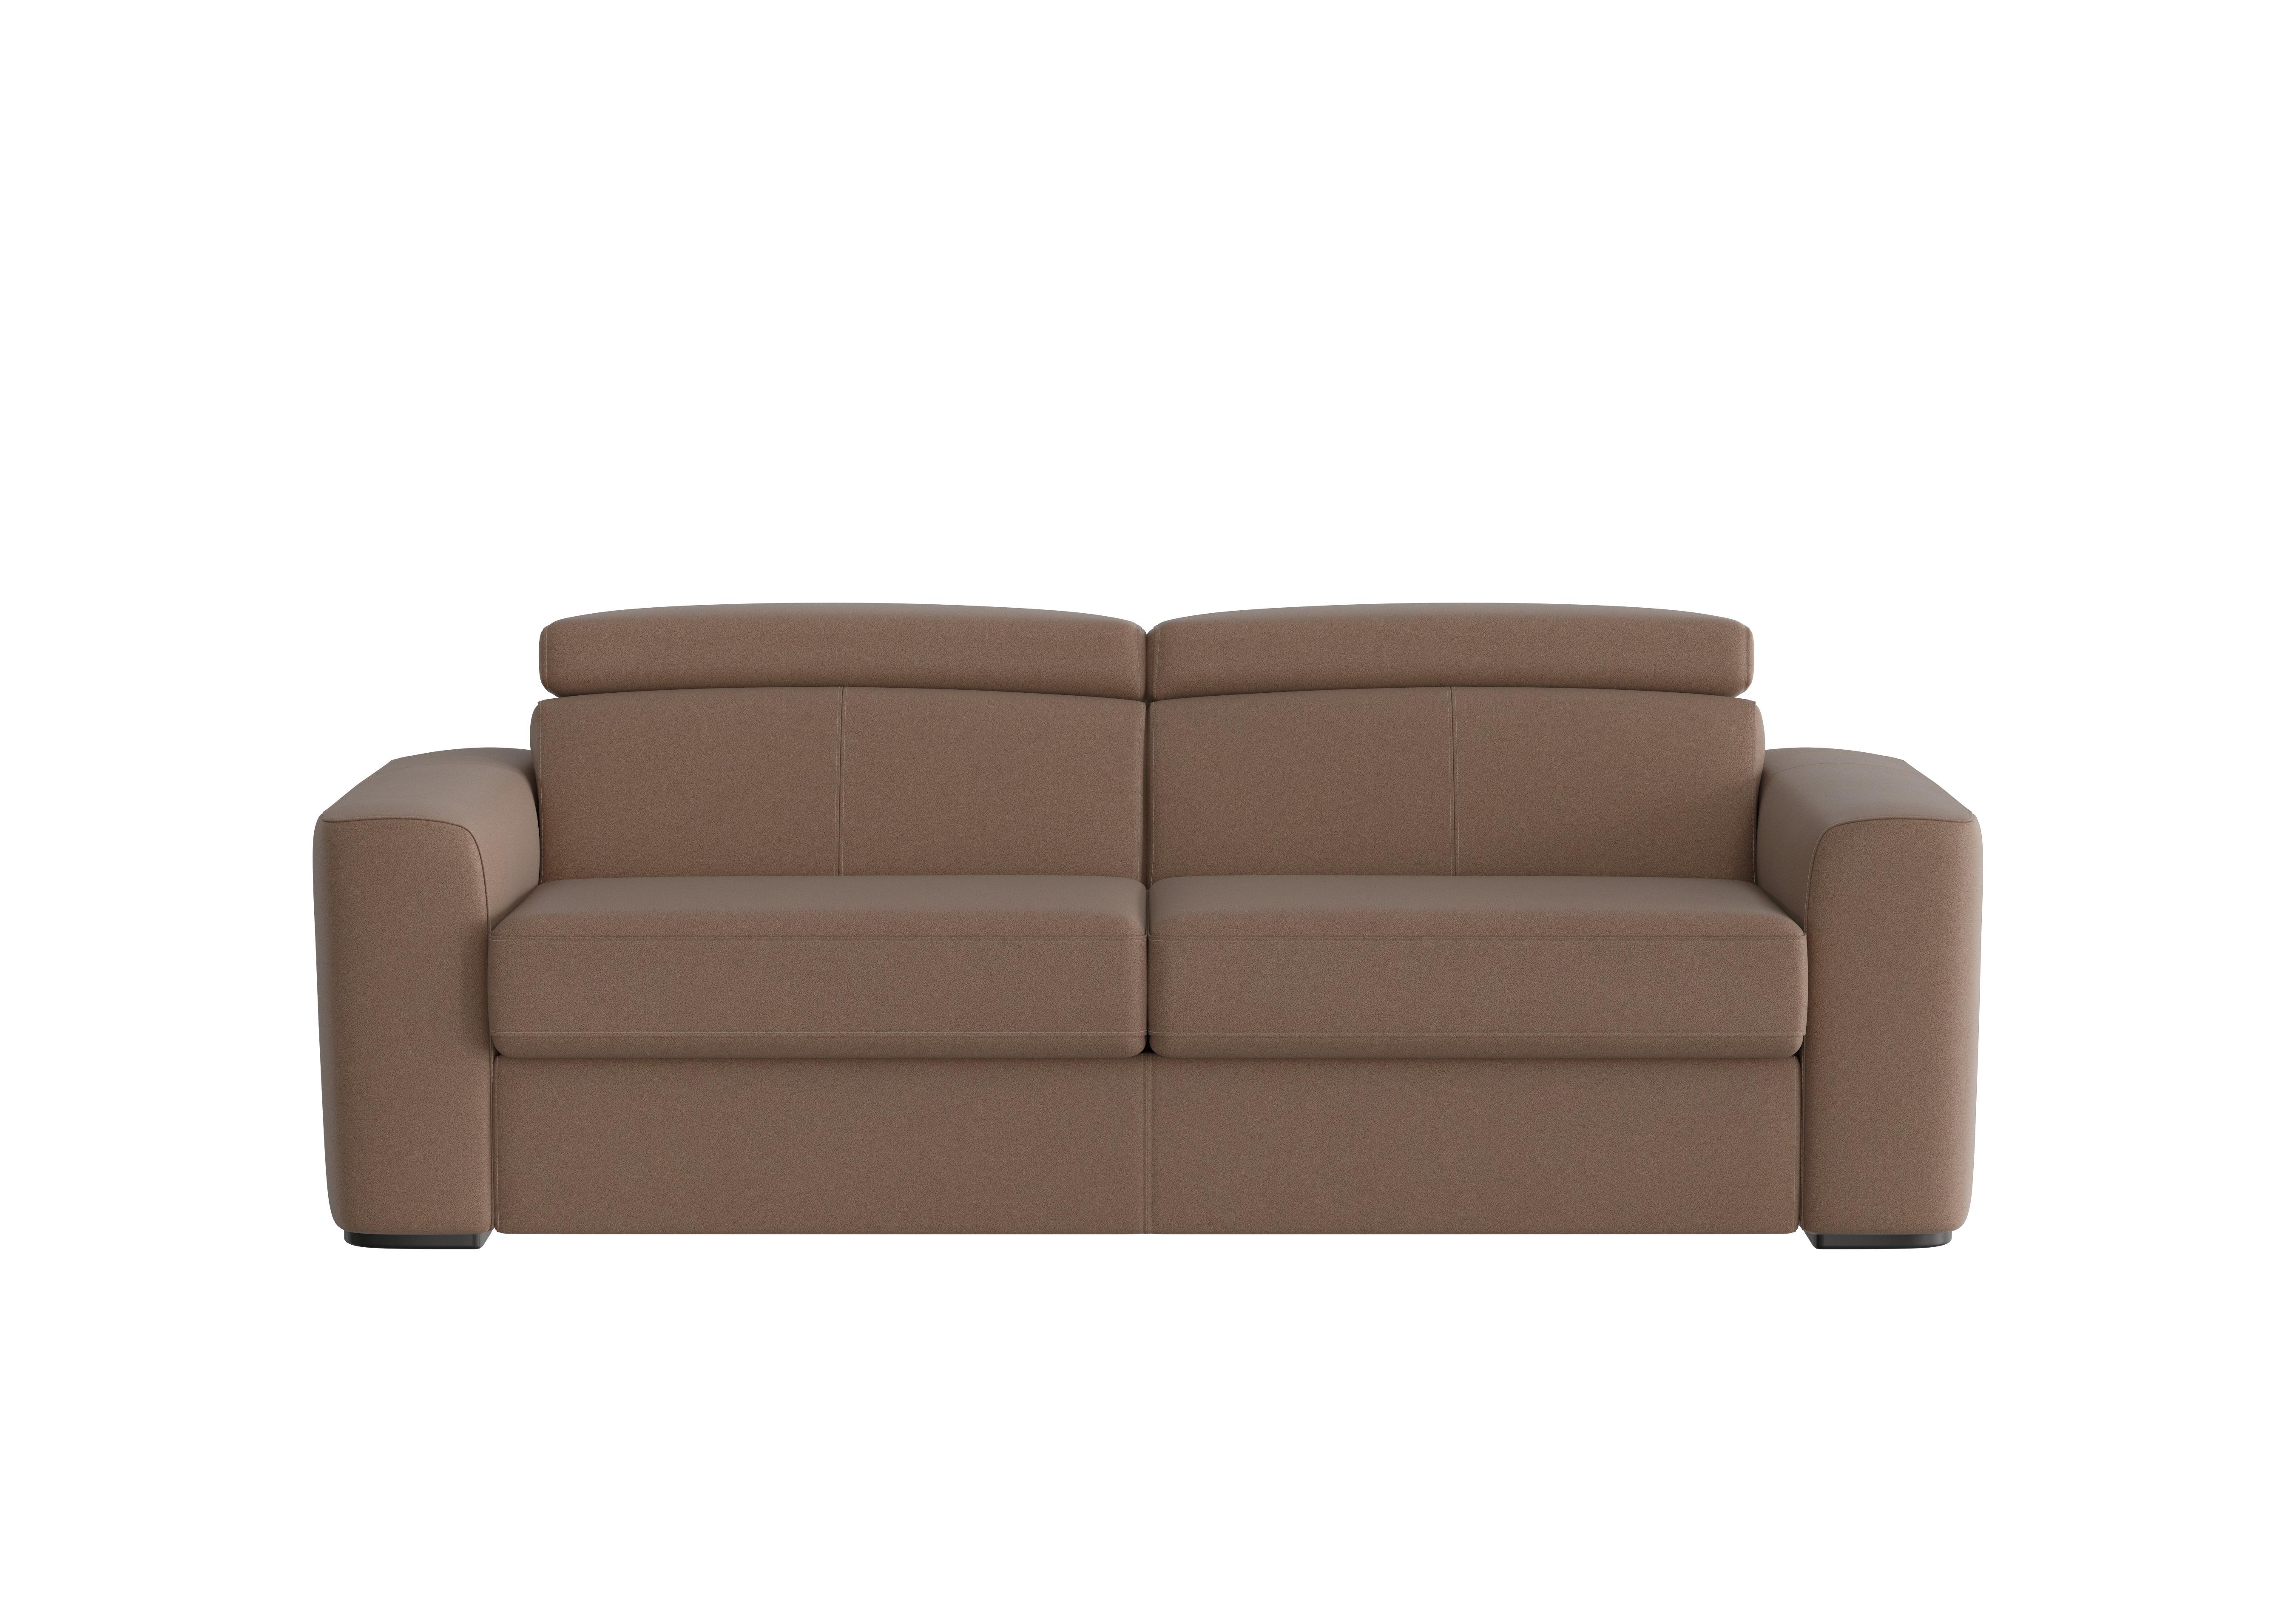 Infinity 3 Seater Fabric Sofa Bed in Bfa-Blj-R04 Tobacco on Furniture Village